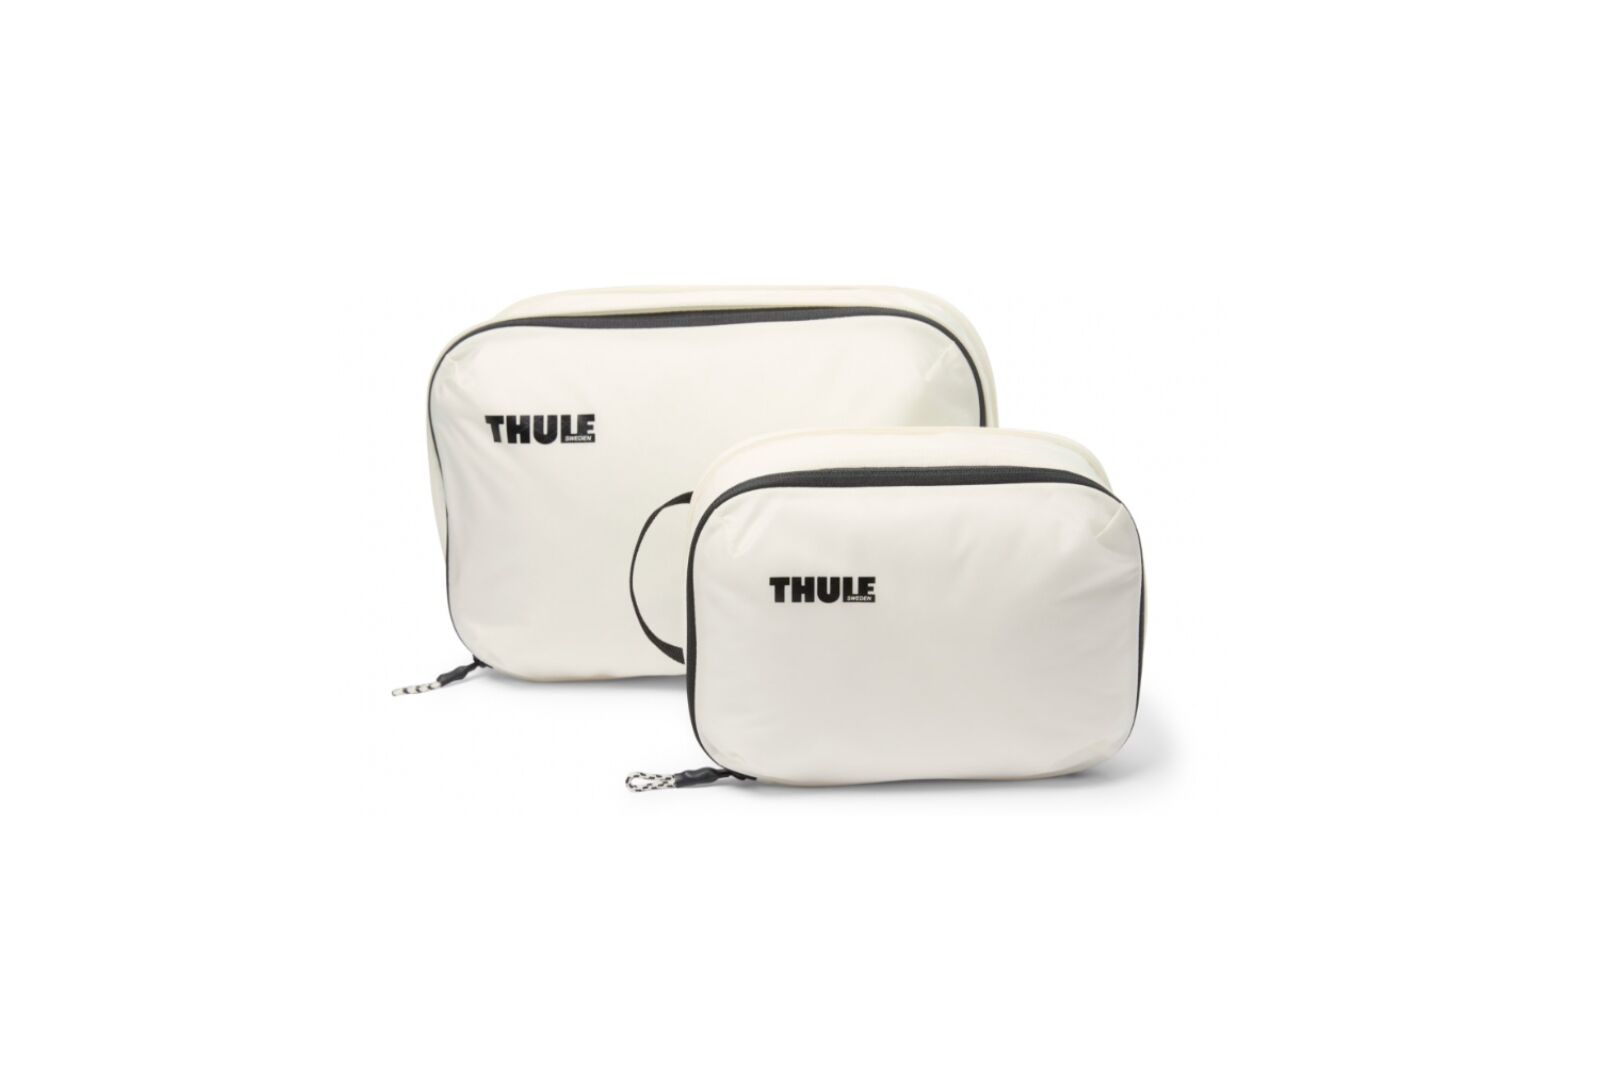 Thule compression packing cube medium, Thule